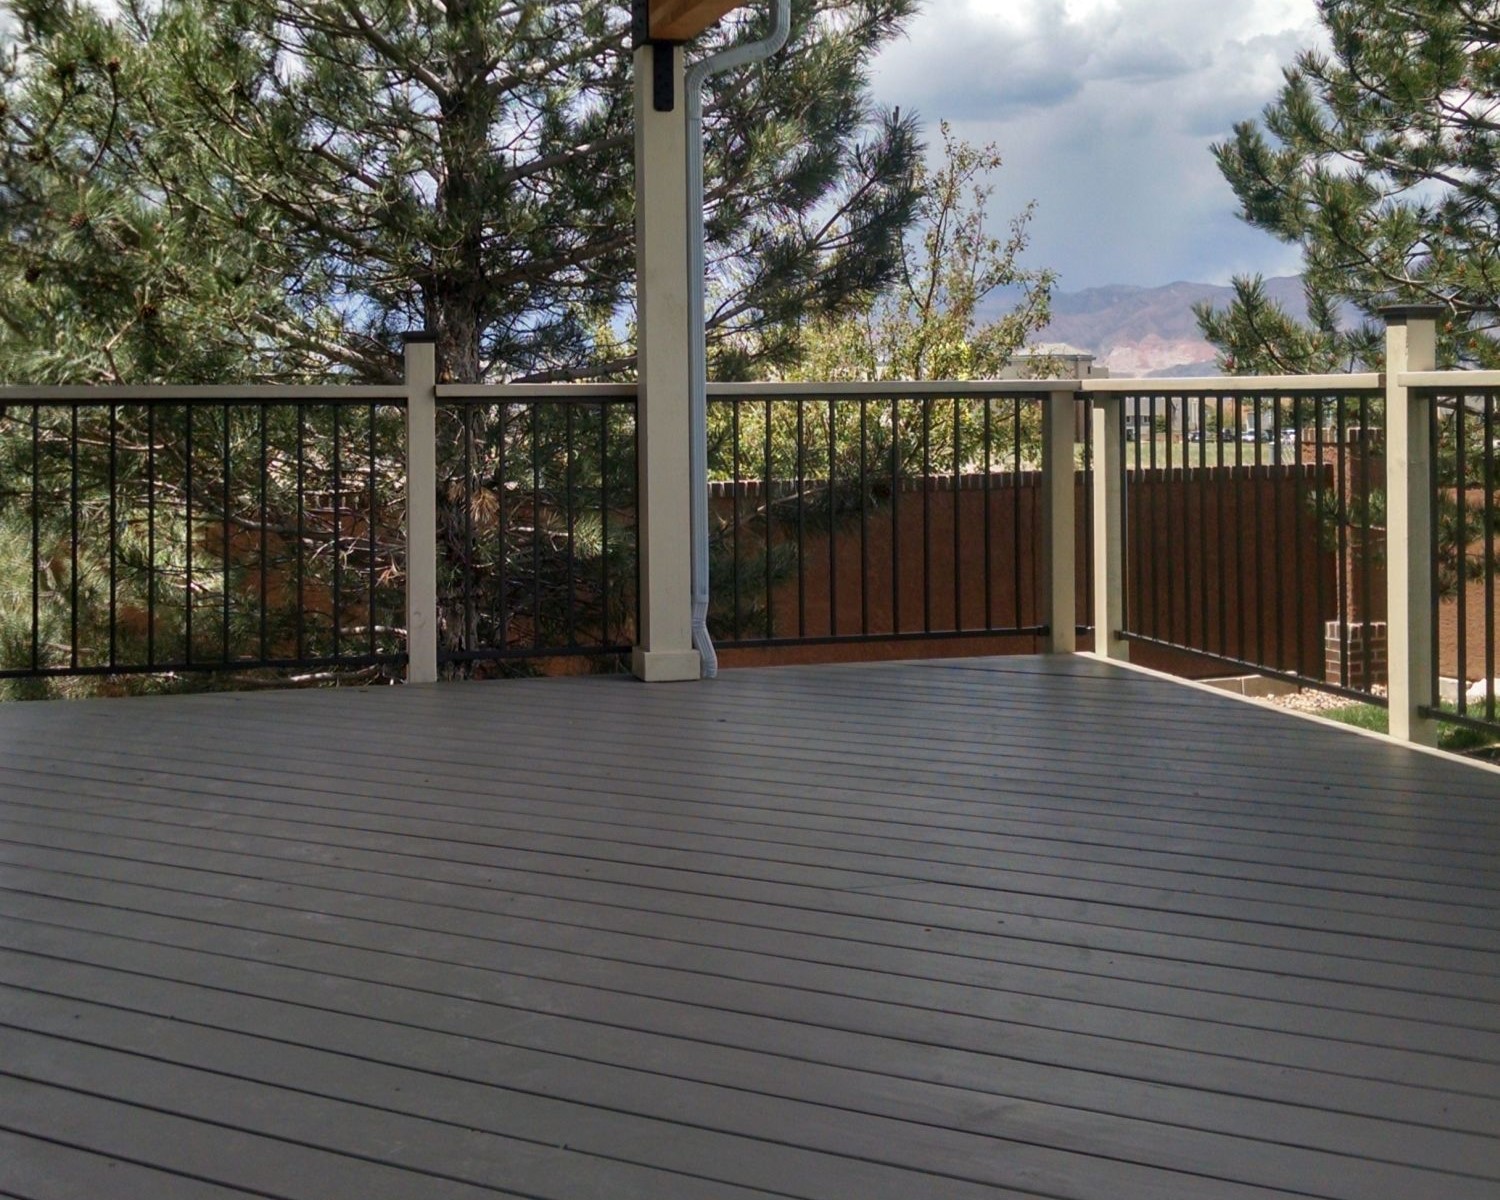 Deck refinished in a solid body stain